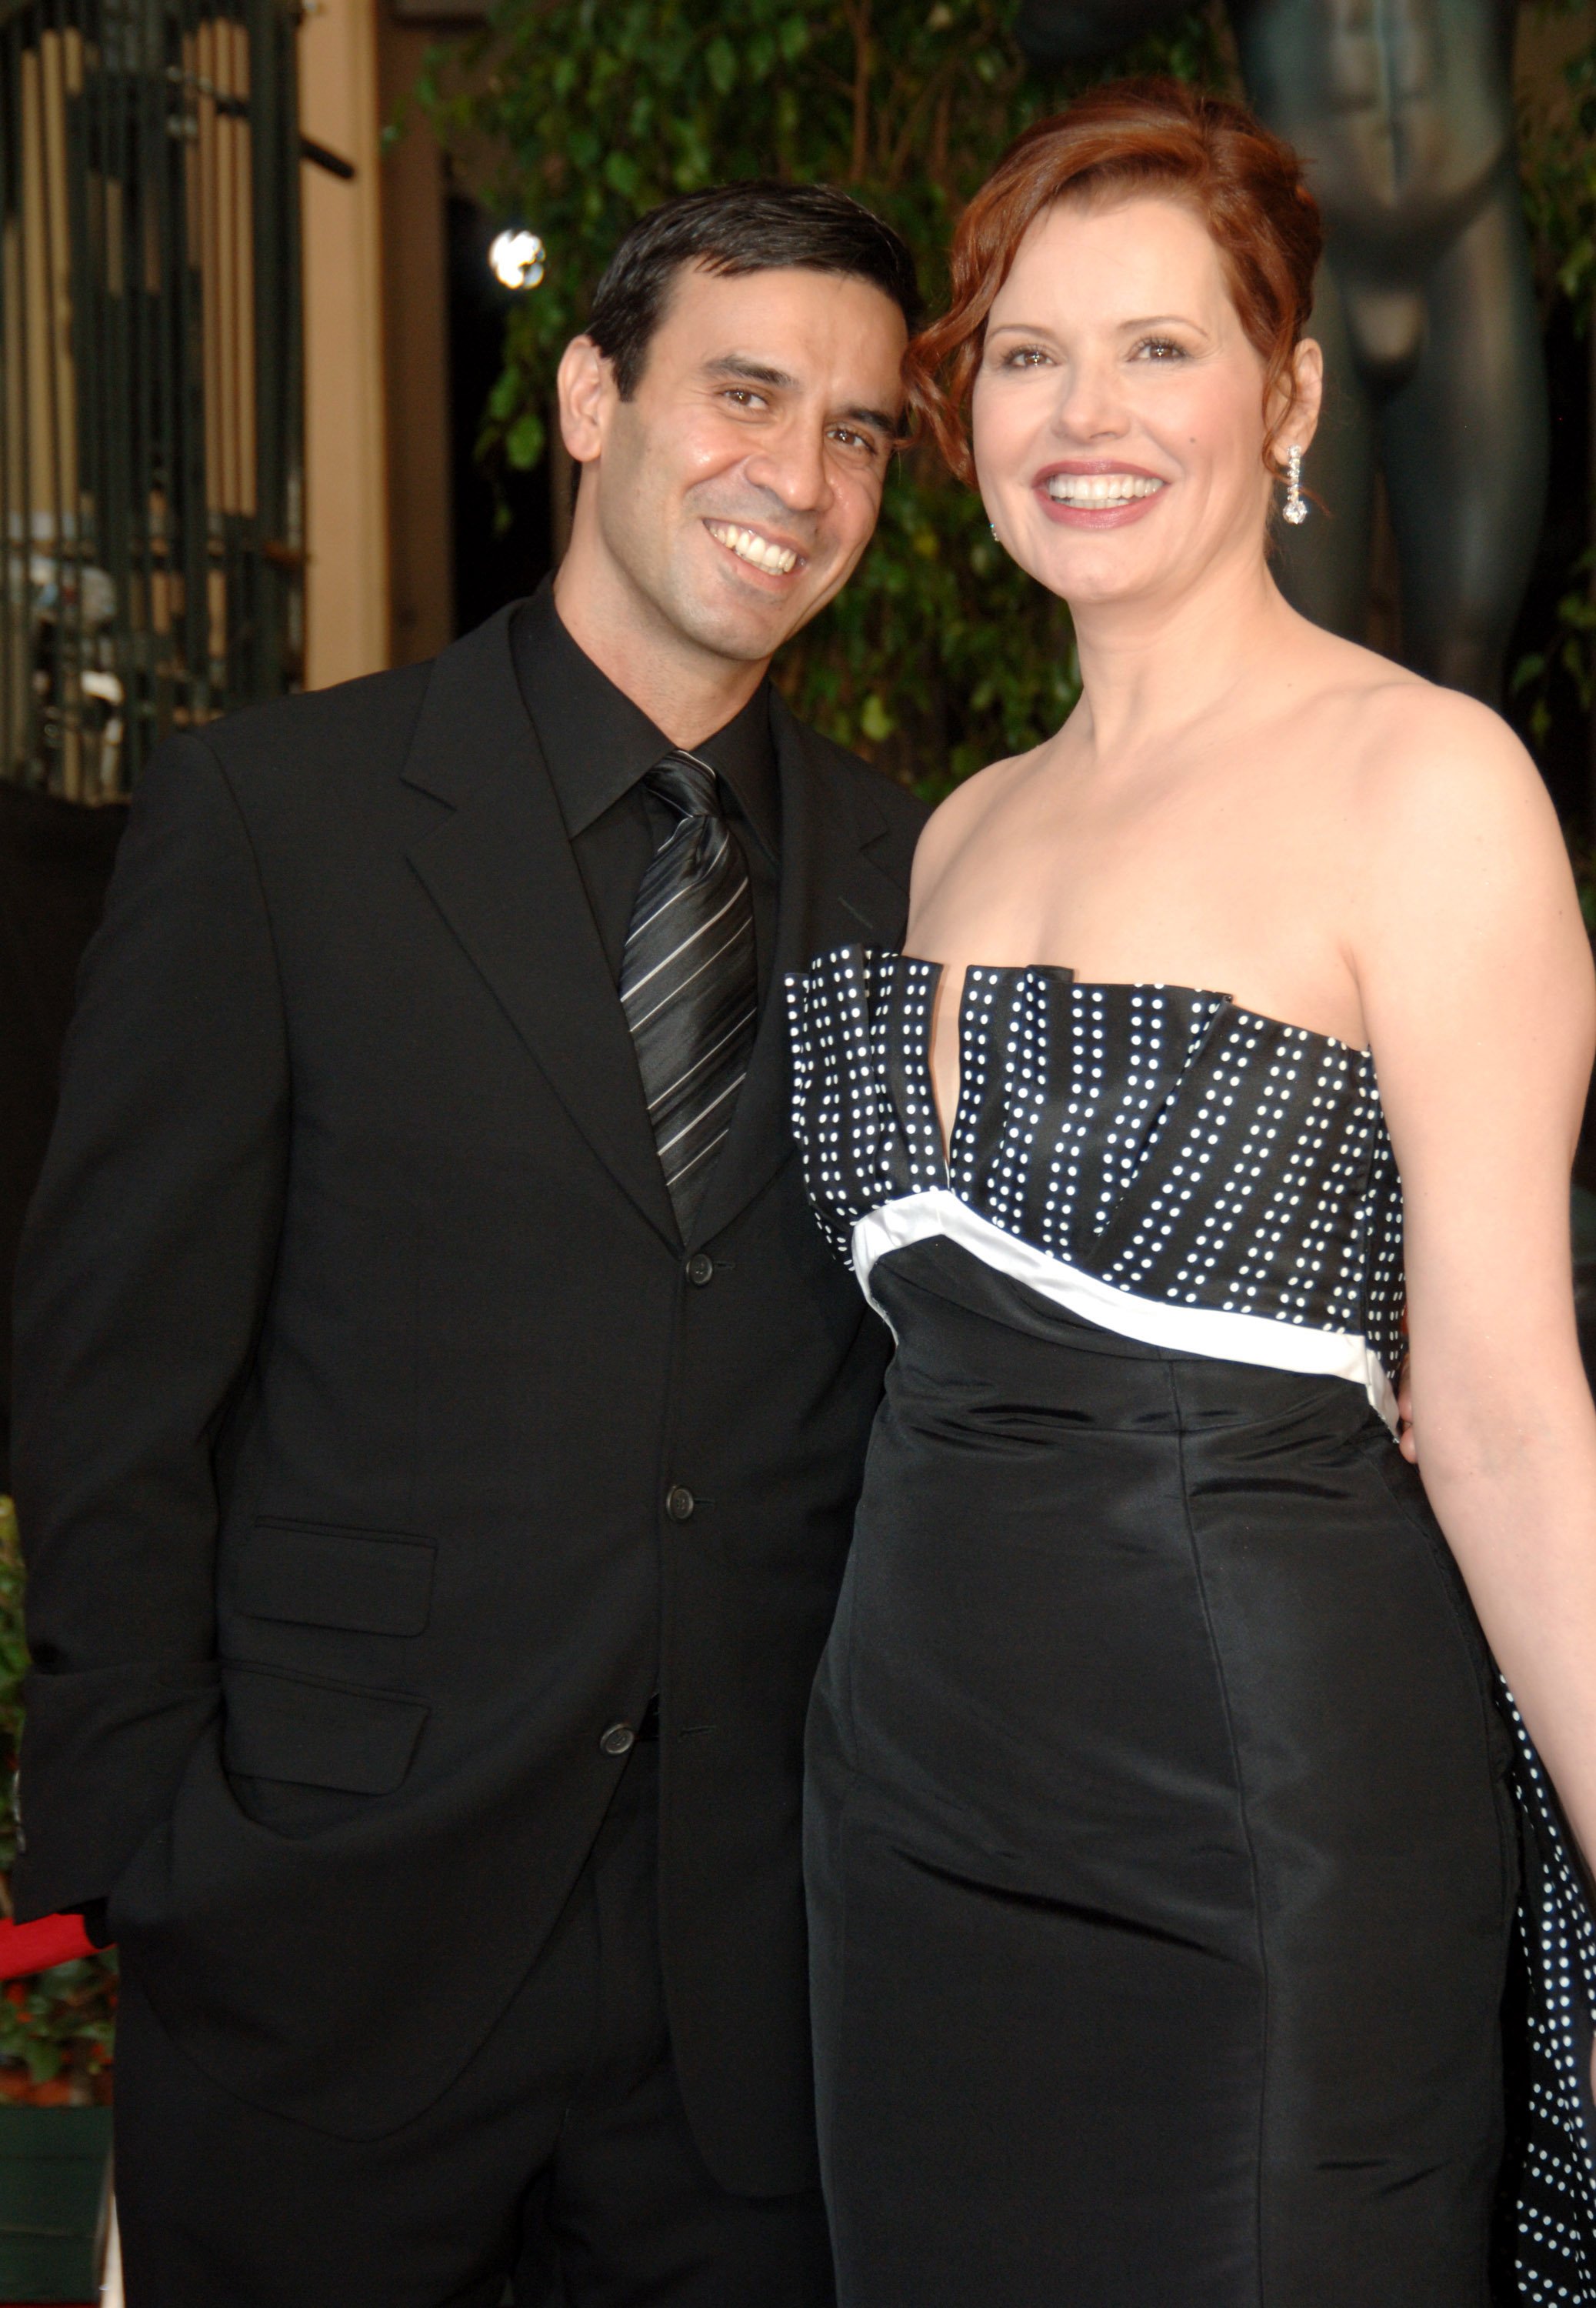 Dr. Reza Jarrahy and Geena Davis at the 12th Annual Screen Actors Guild Awards in Los Angeles, California, on January 29, 2006 | Source: Getty Images